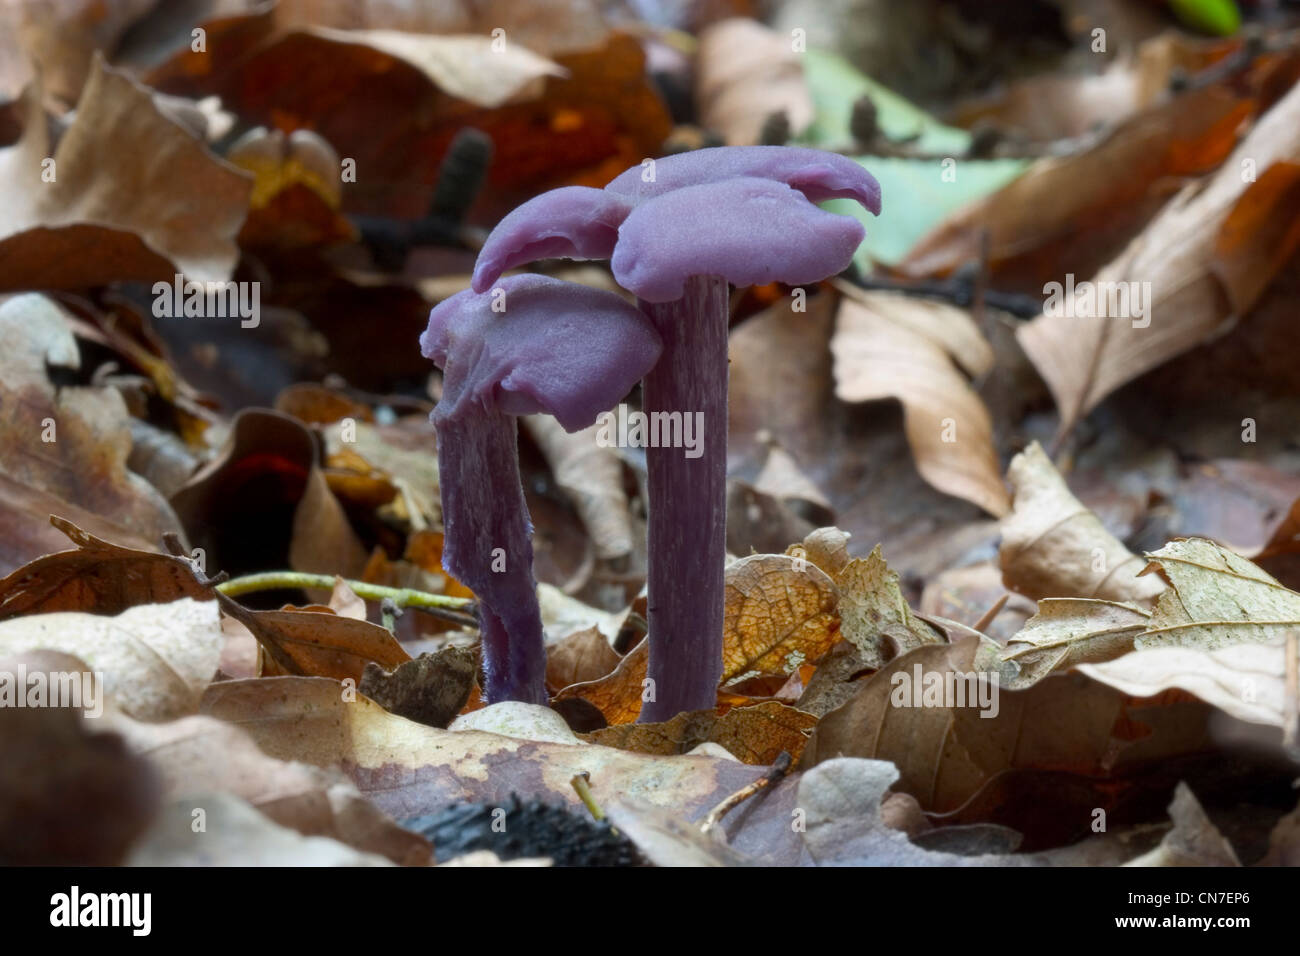 Amethyst Deceiver (Laccaria amethystina) between dead leaves Stock Photo